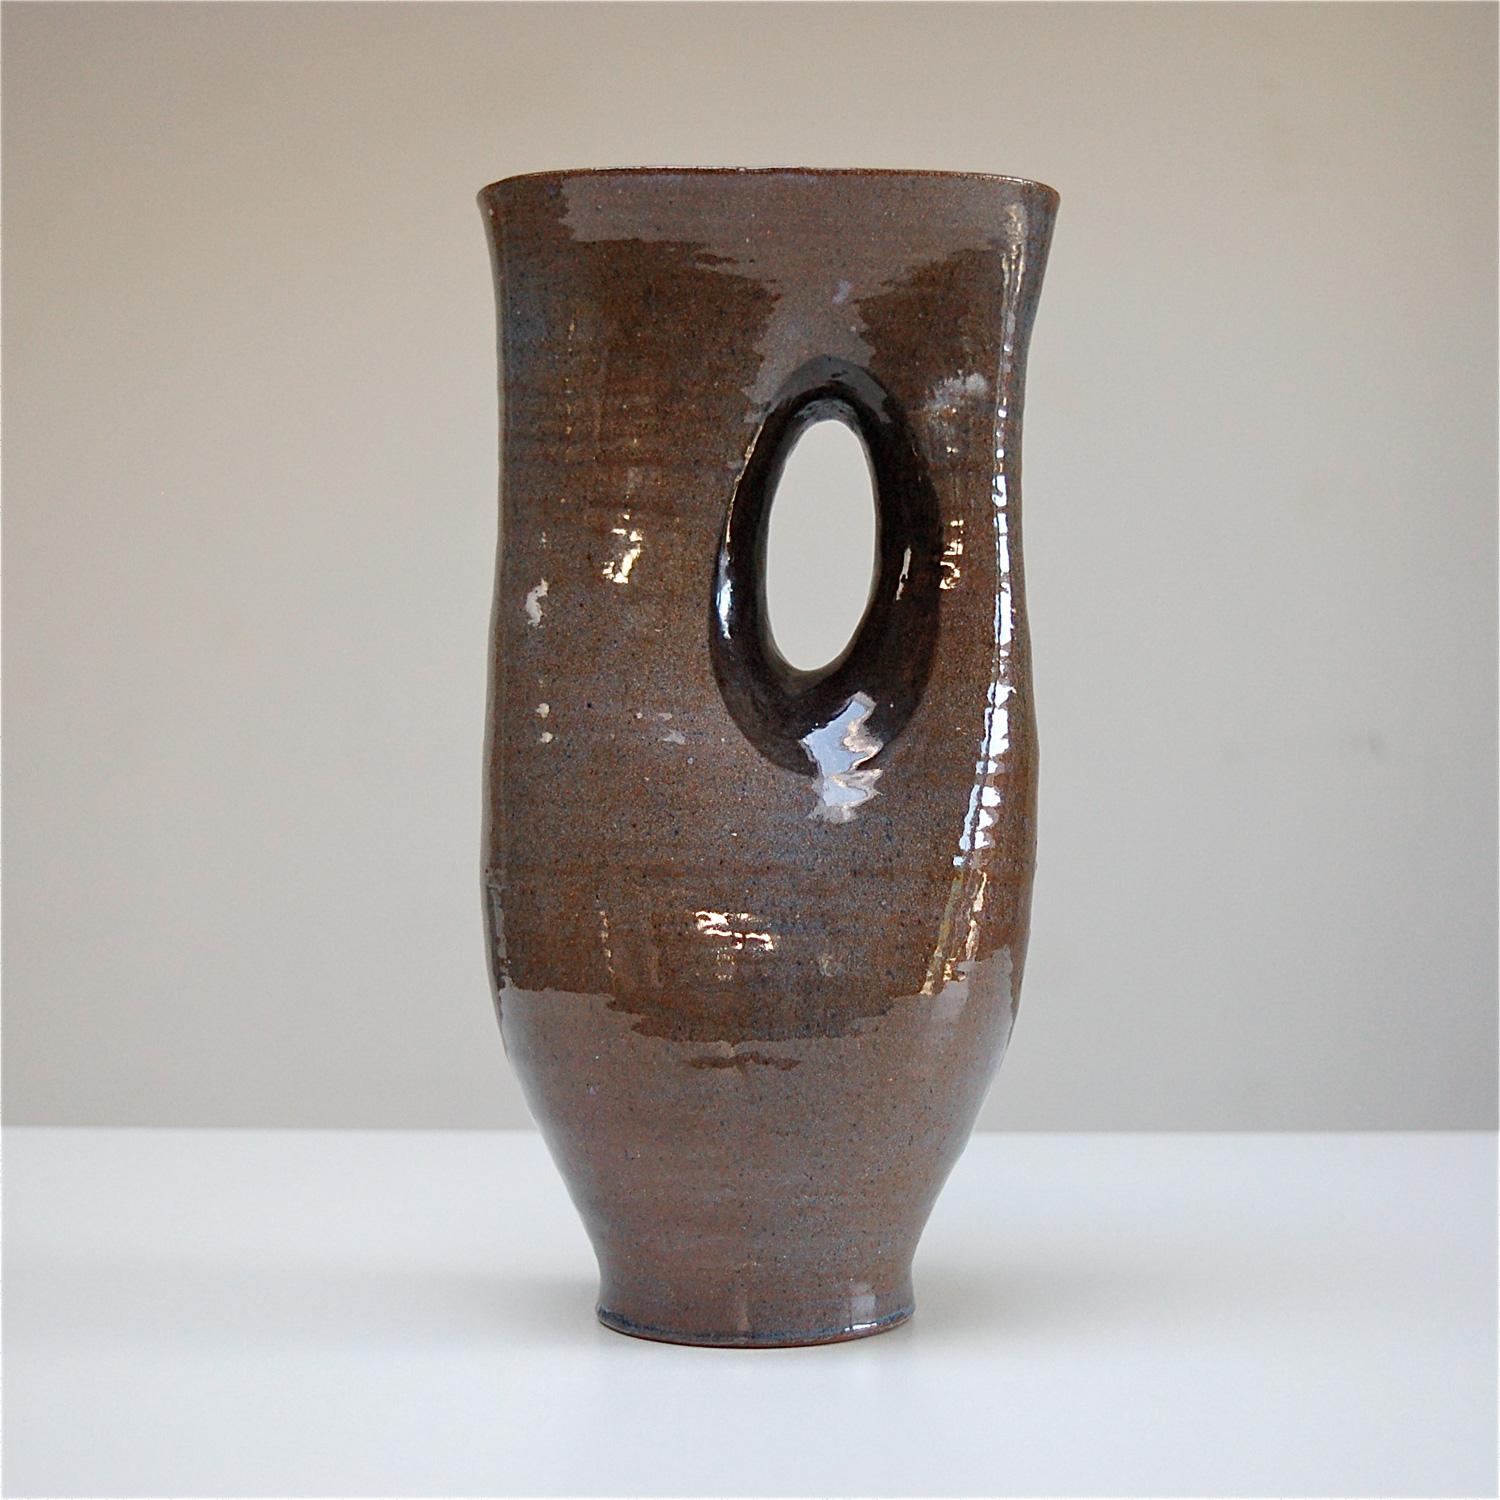 This exceptional glazed ceramic vase is an early work by Antoine de Vinck. The soft, fluid shape is very complex and could only have been made by a gifted ceramicist like de Vinck. The glaze consists of different shades of brown, grey and blue and